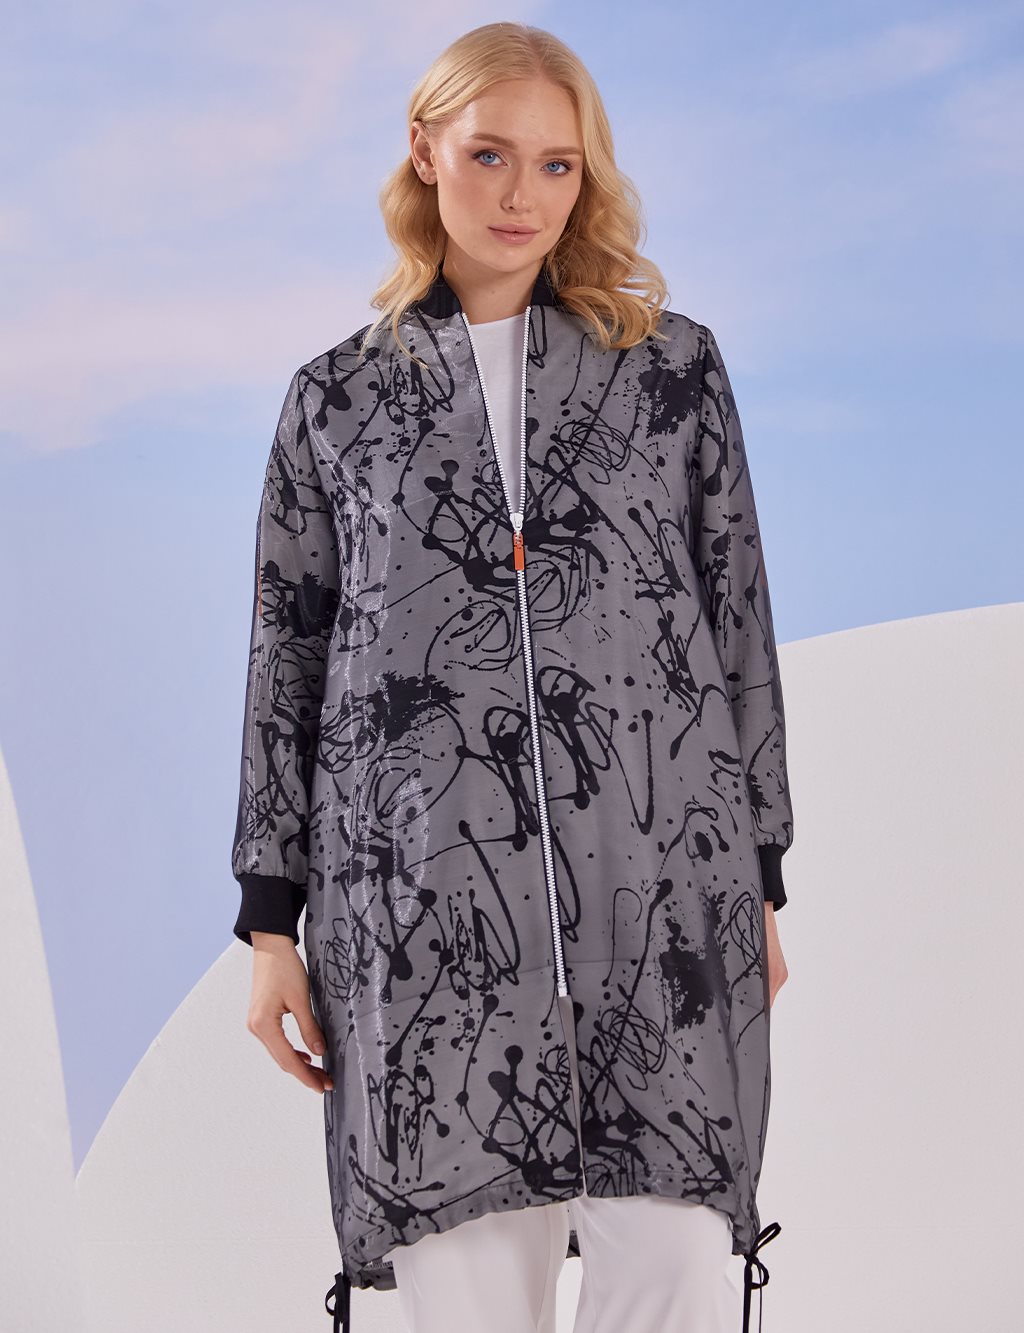 Abstract Patterned Sports Trench Coat Black and White